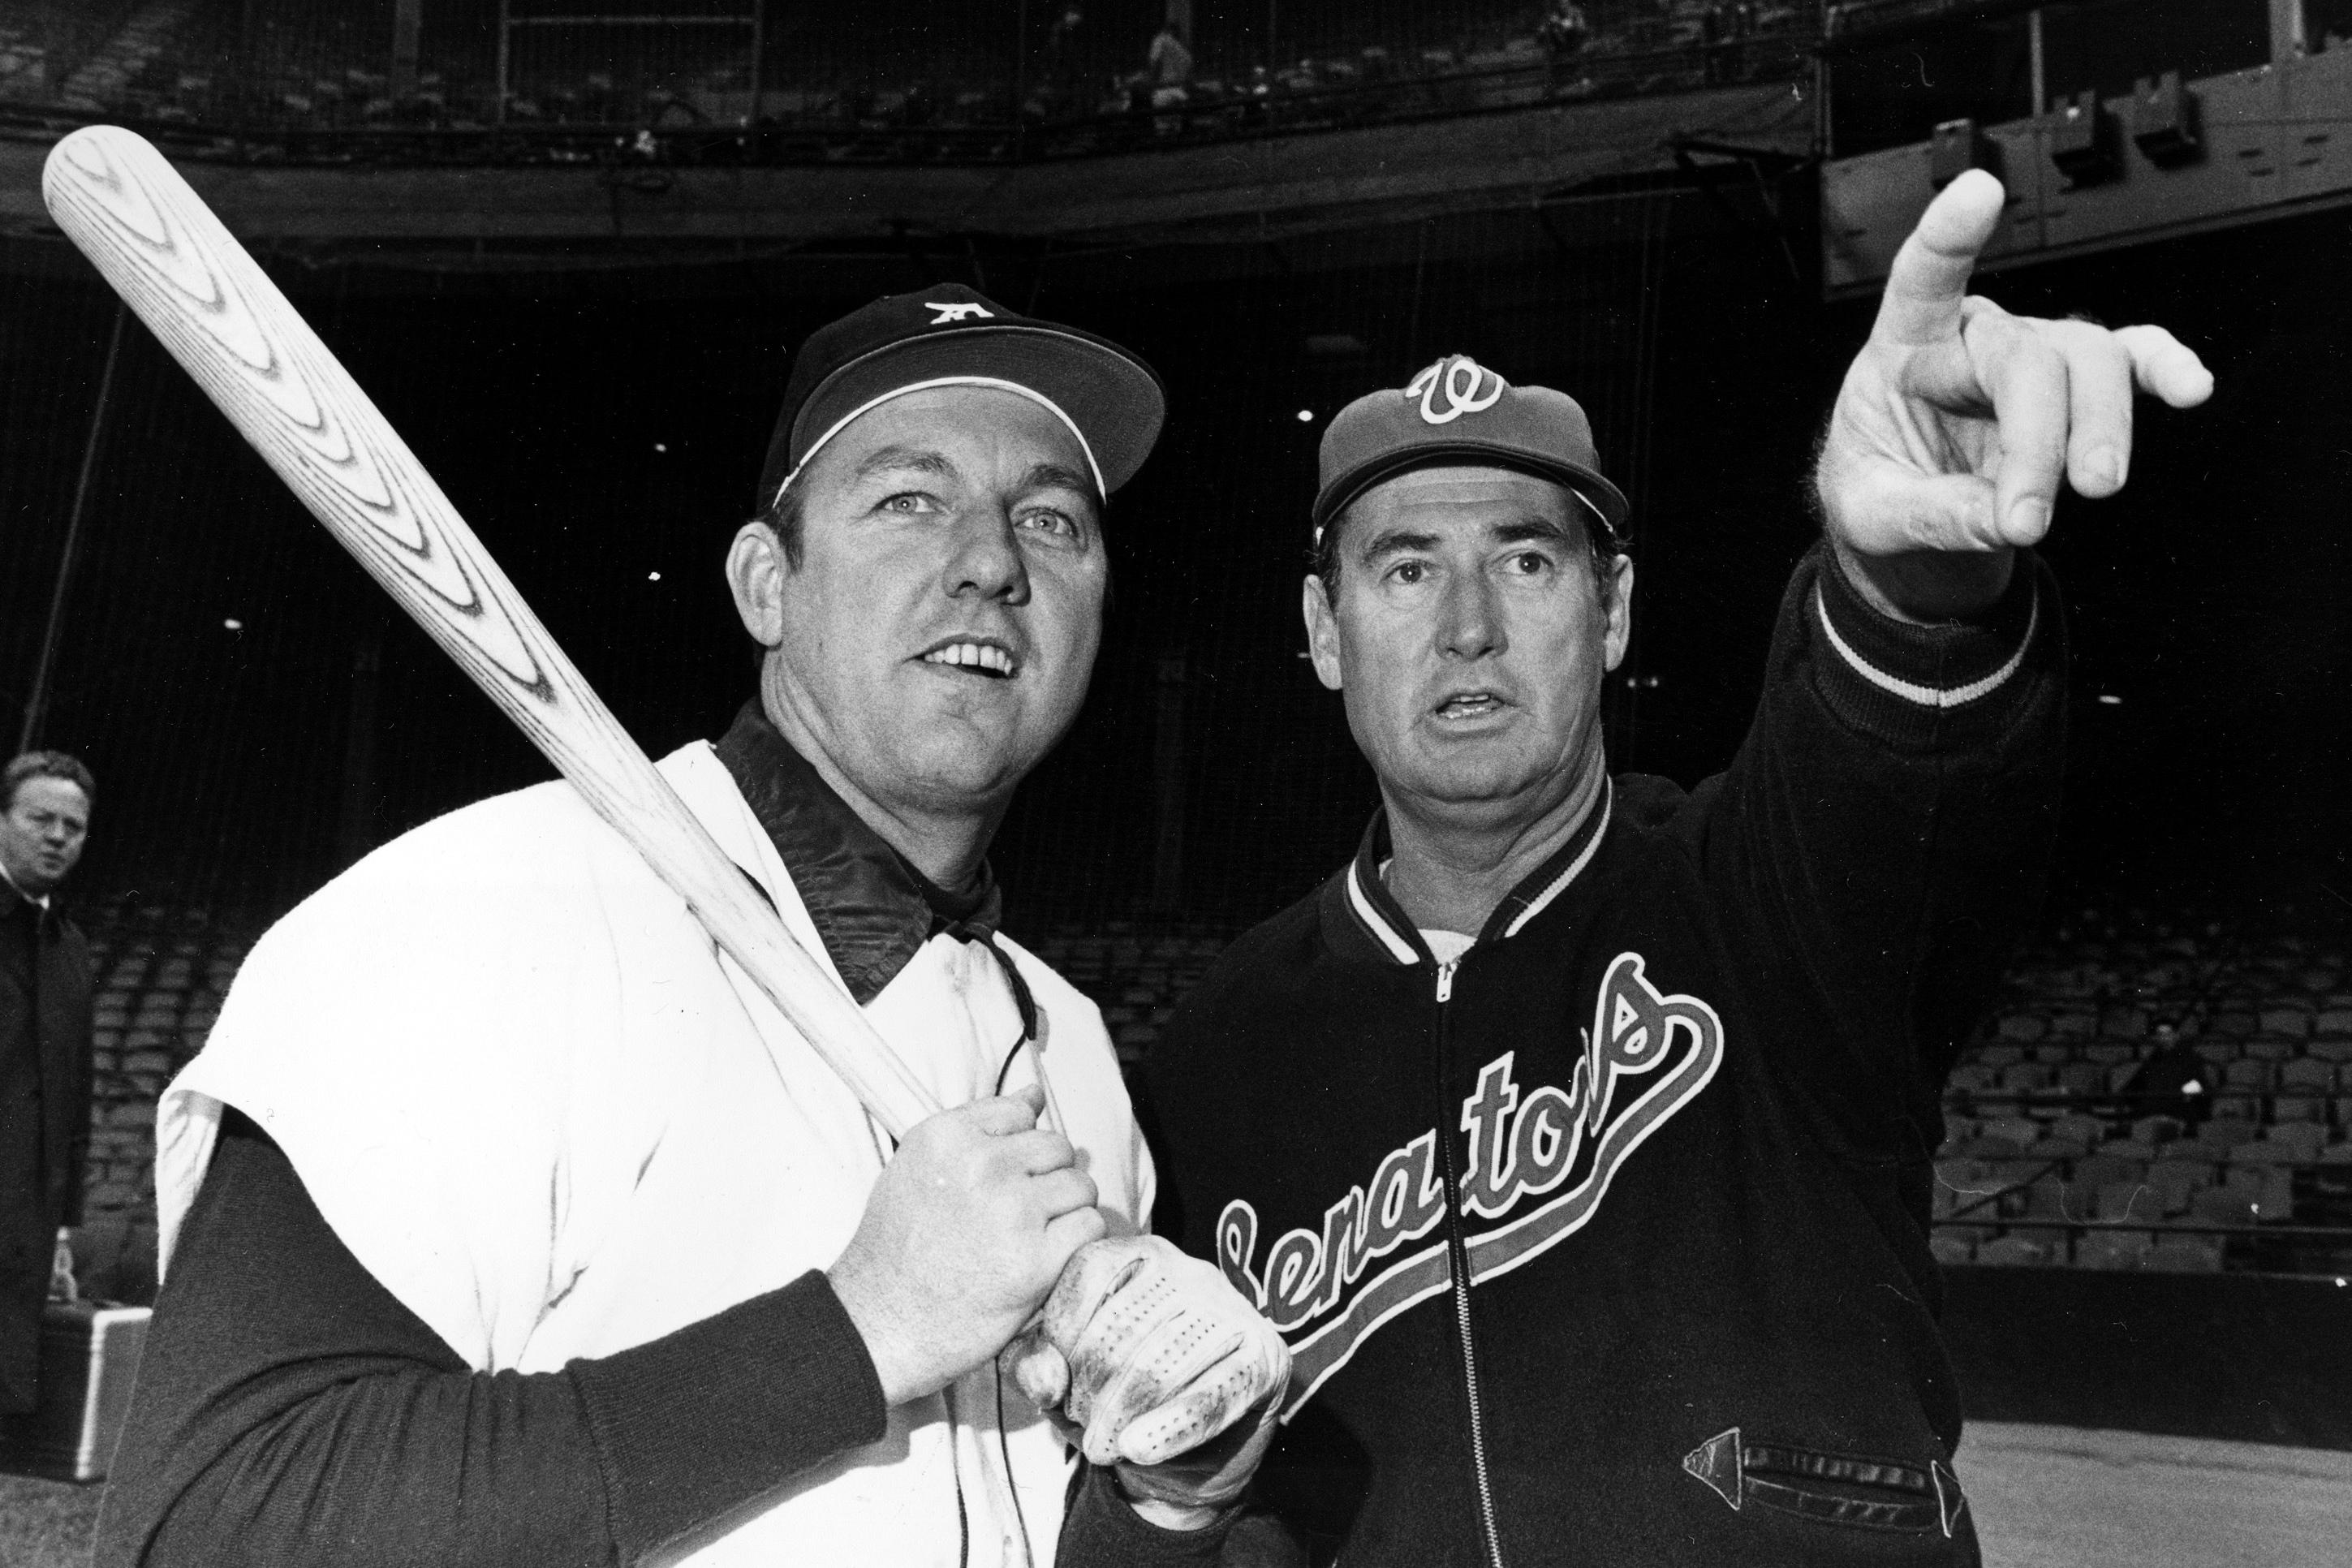 Hall of Famer Kaline dies; was known as 'Mr. Tiger', Sports